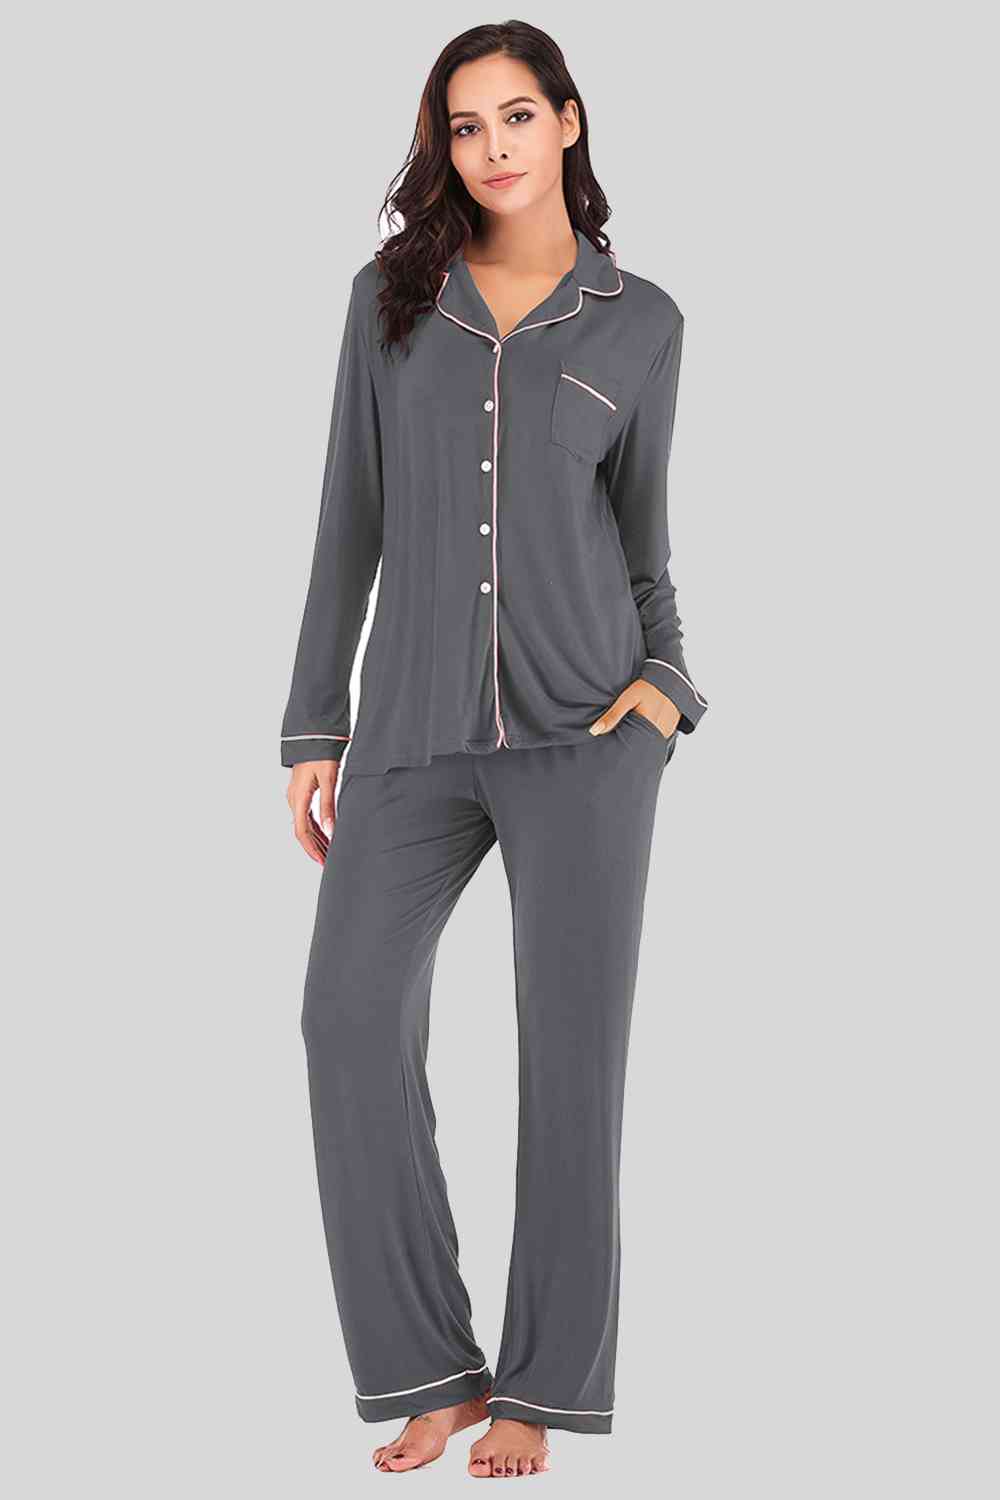 Collared Neck Long Sleeve Loungewear Set with Pockets Charcoal